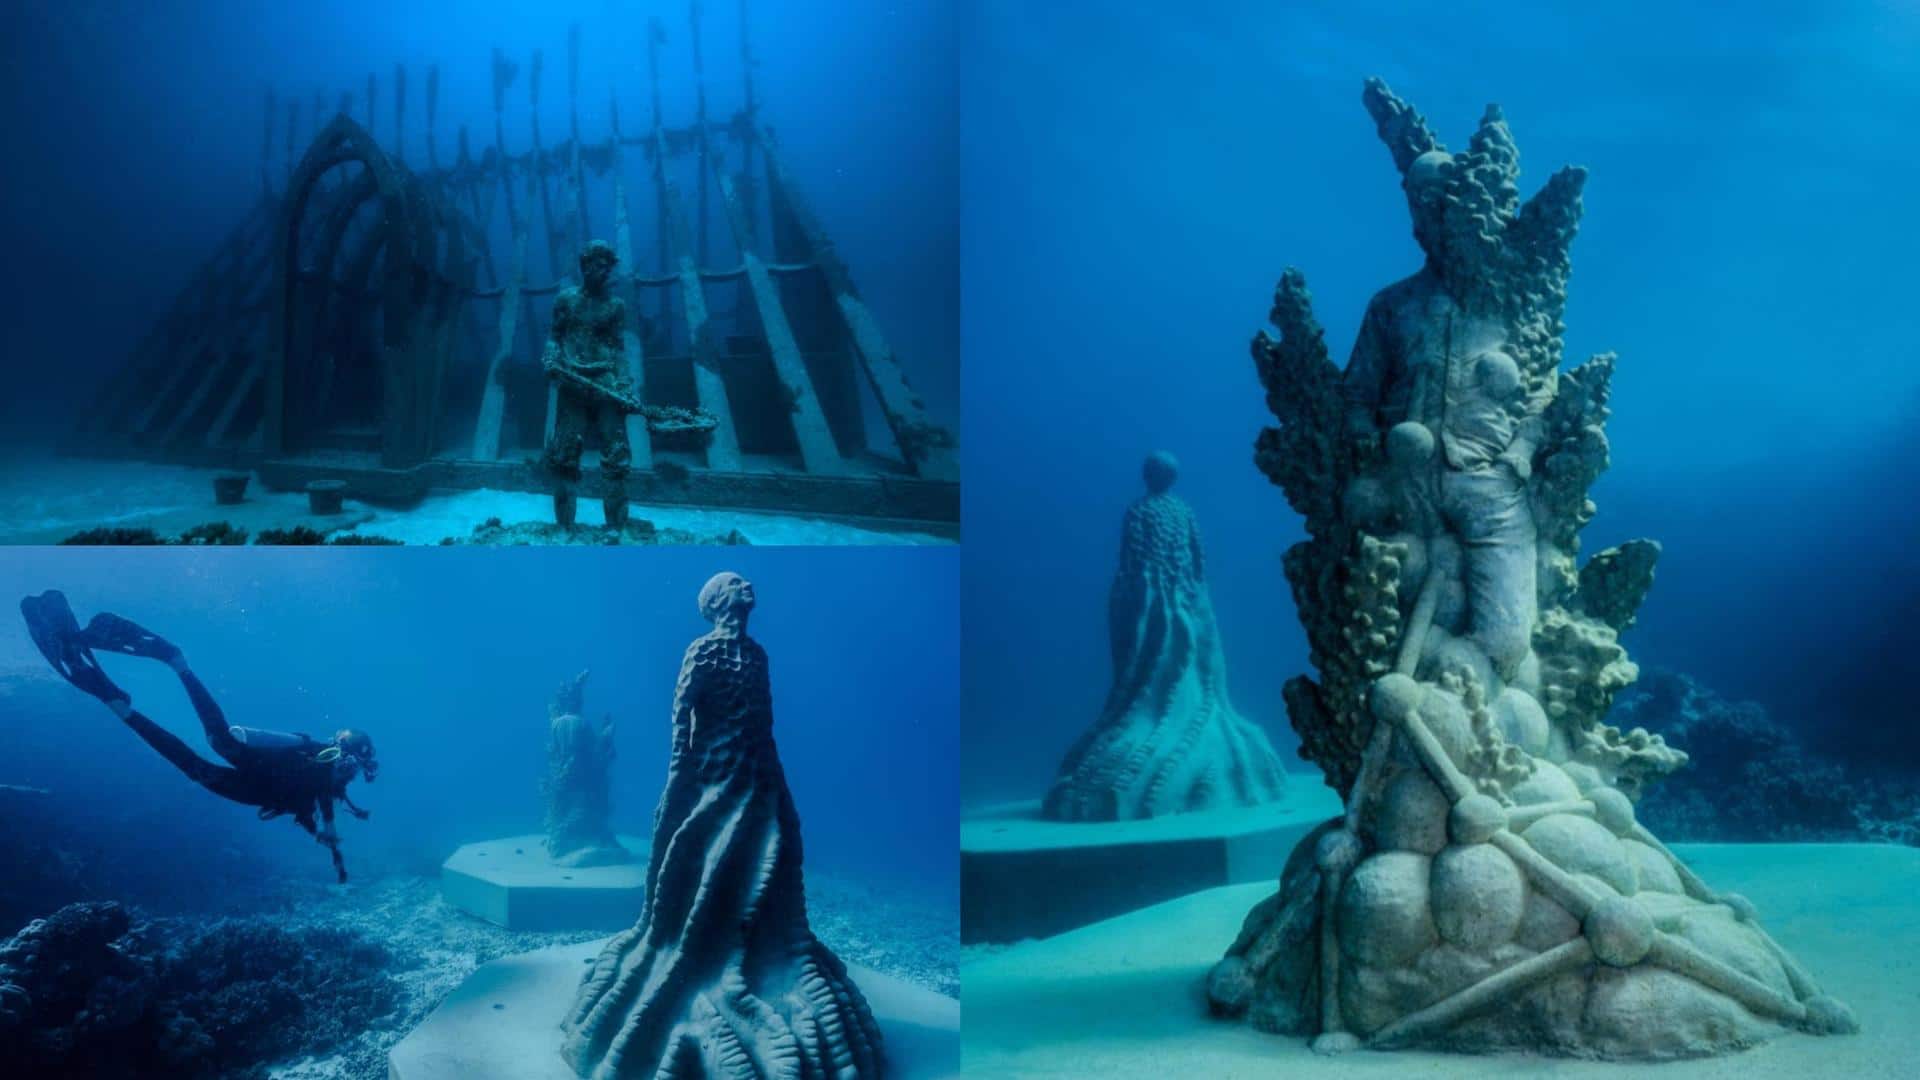 Museum Of Underwater Art: You can snorkel in this museum